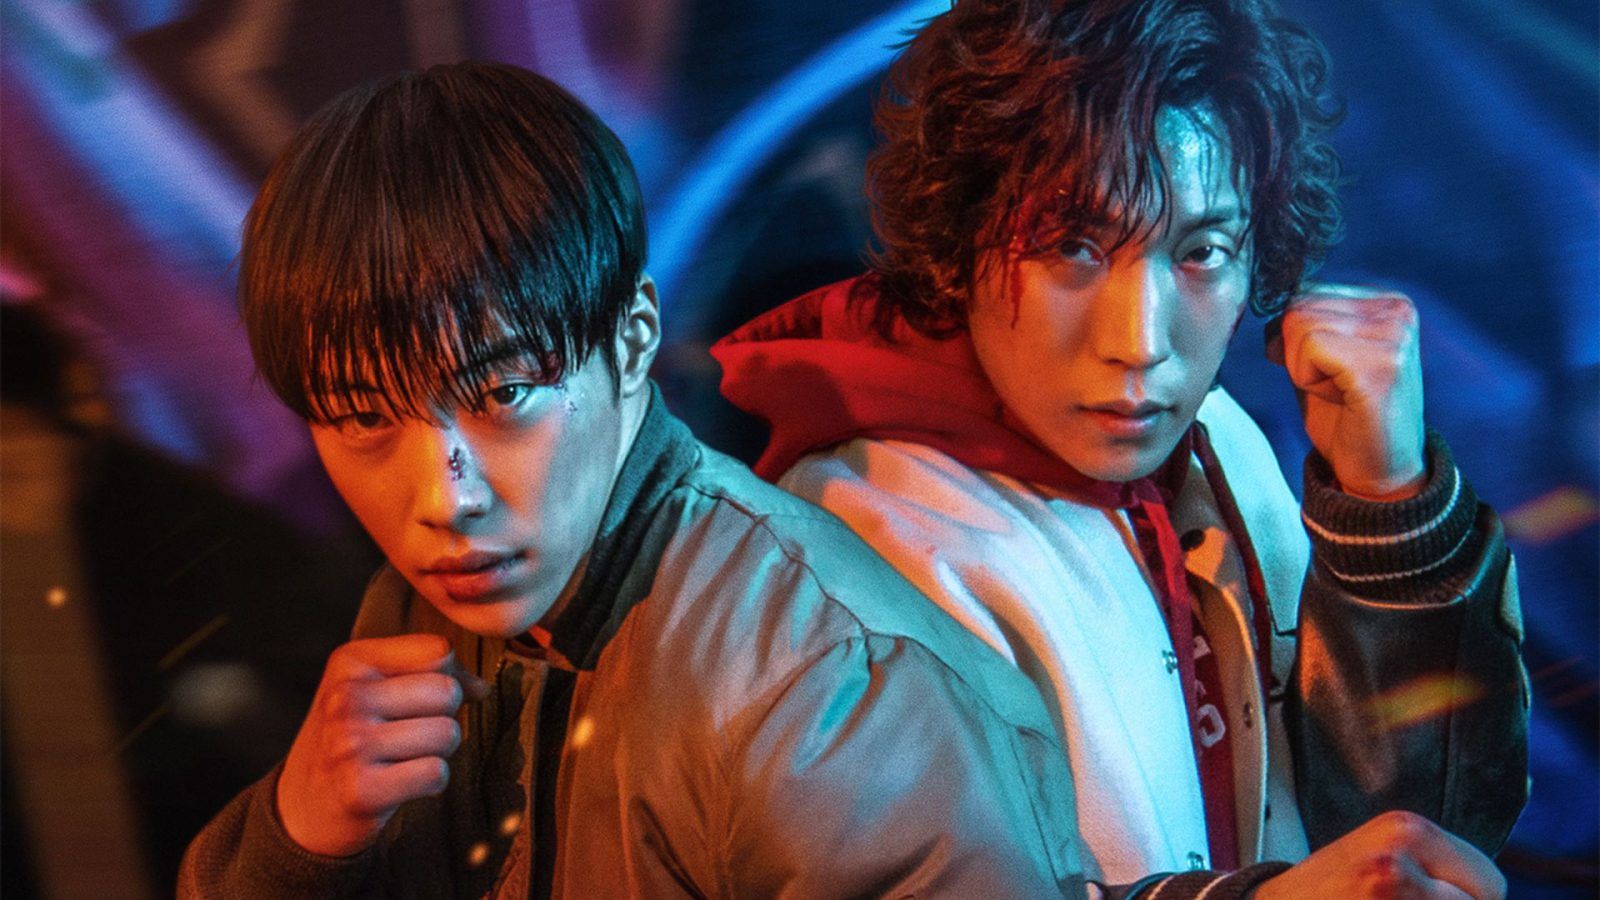 HIGHLY-ANTICIPATED KOREAN DRAMA THE KING: ETERNAL MONARCH TO PREMIERE ON  NETFLIX IN APRIL - About Netflix